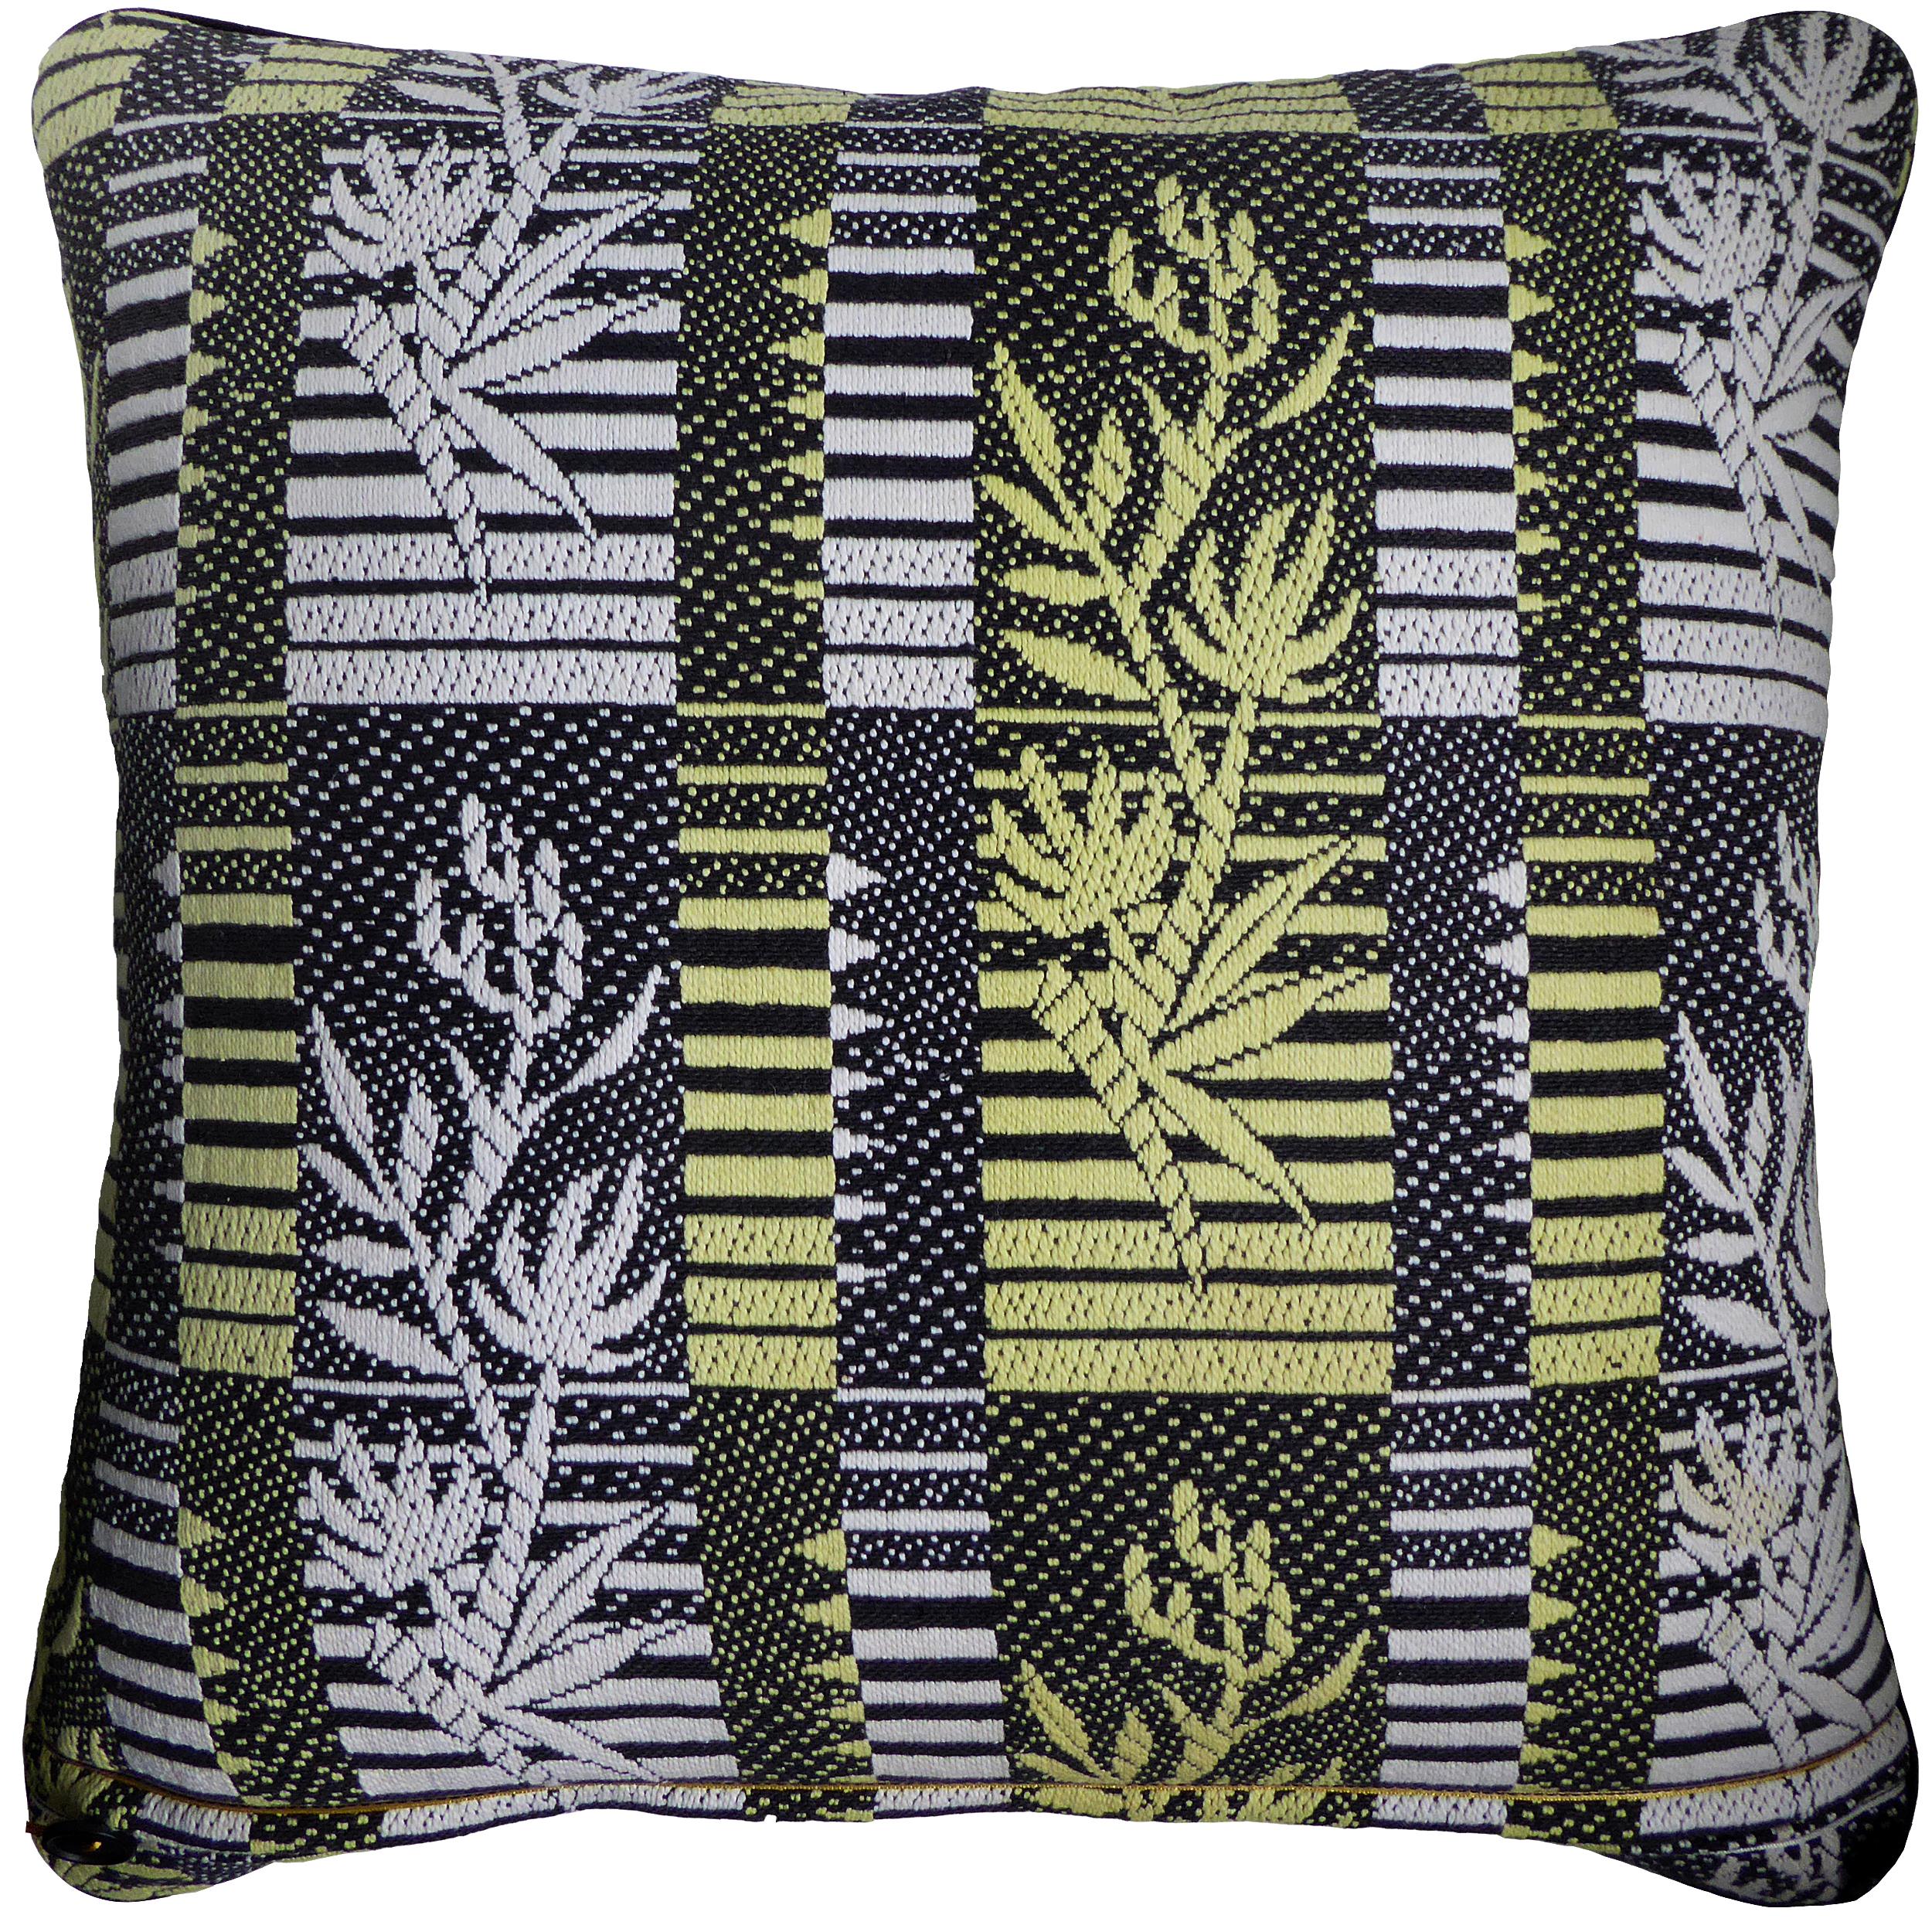 Vintage cushions - 'Bus Seats',
Circa – 1960 
British made luxury cushion created by using original vintage furnishing fabric
Provenance; Britain
Made by Nichollette Yardley-Moore
Vintage Cushions
Cotton furnishing fabric with full cotton